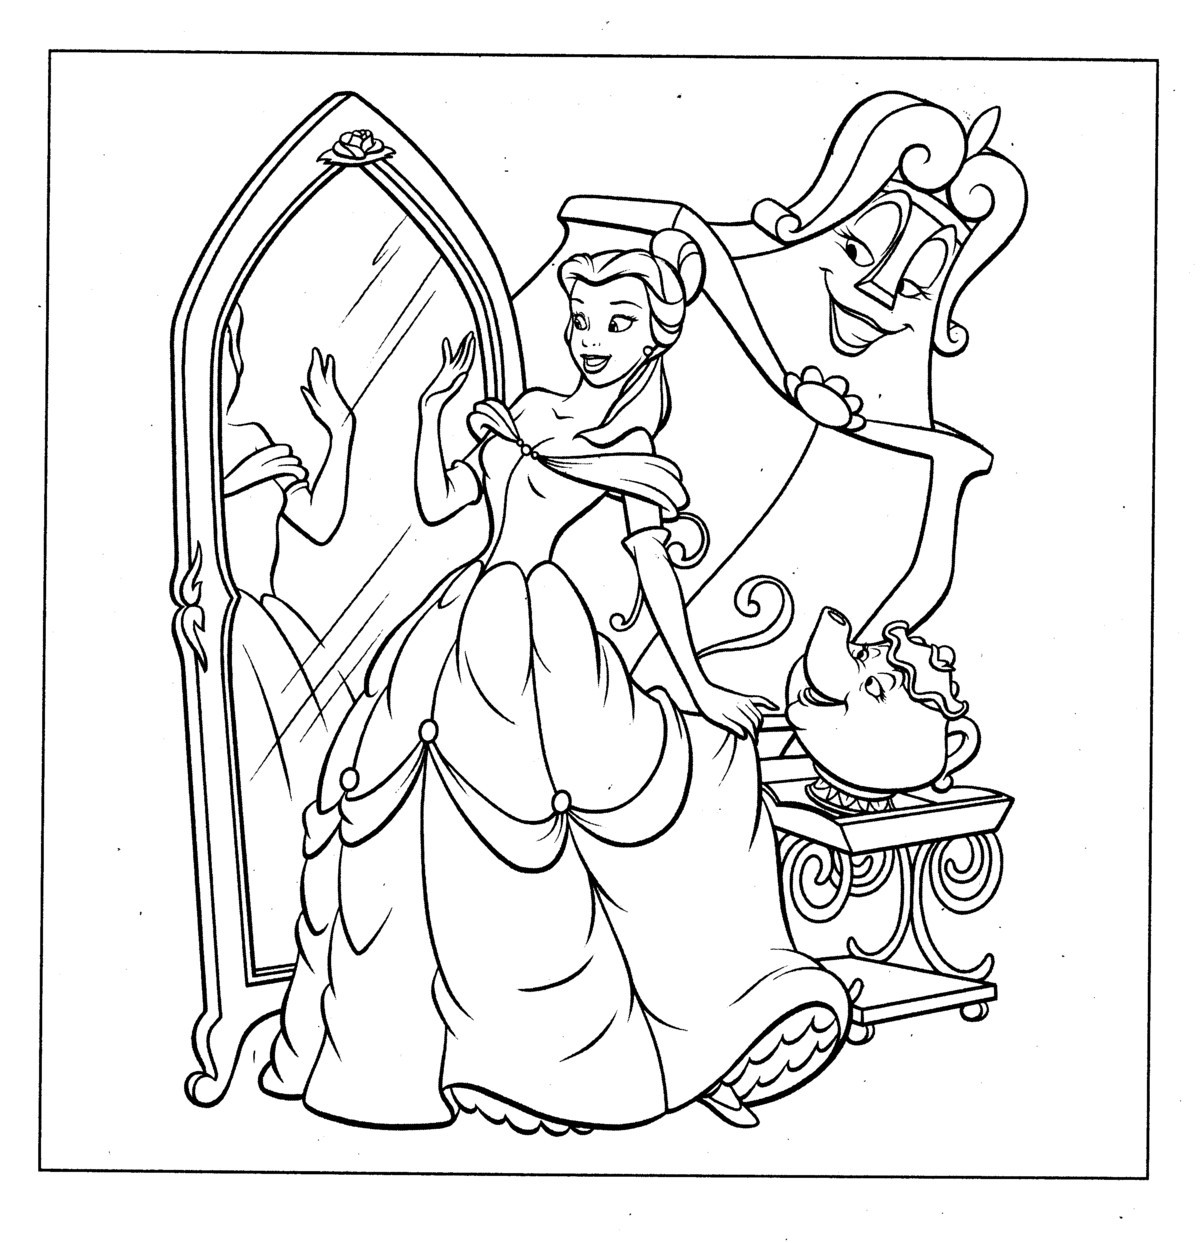 Belle Coloring Pages To Print
 Free Printable Belle Coloring Pages For Kids